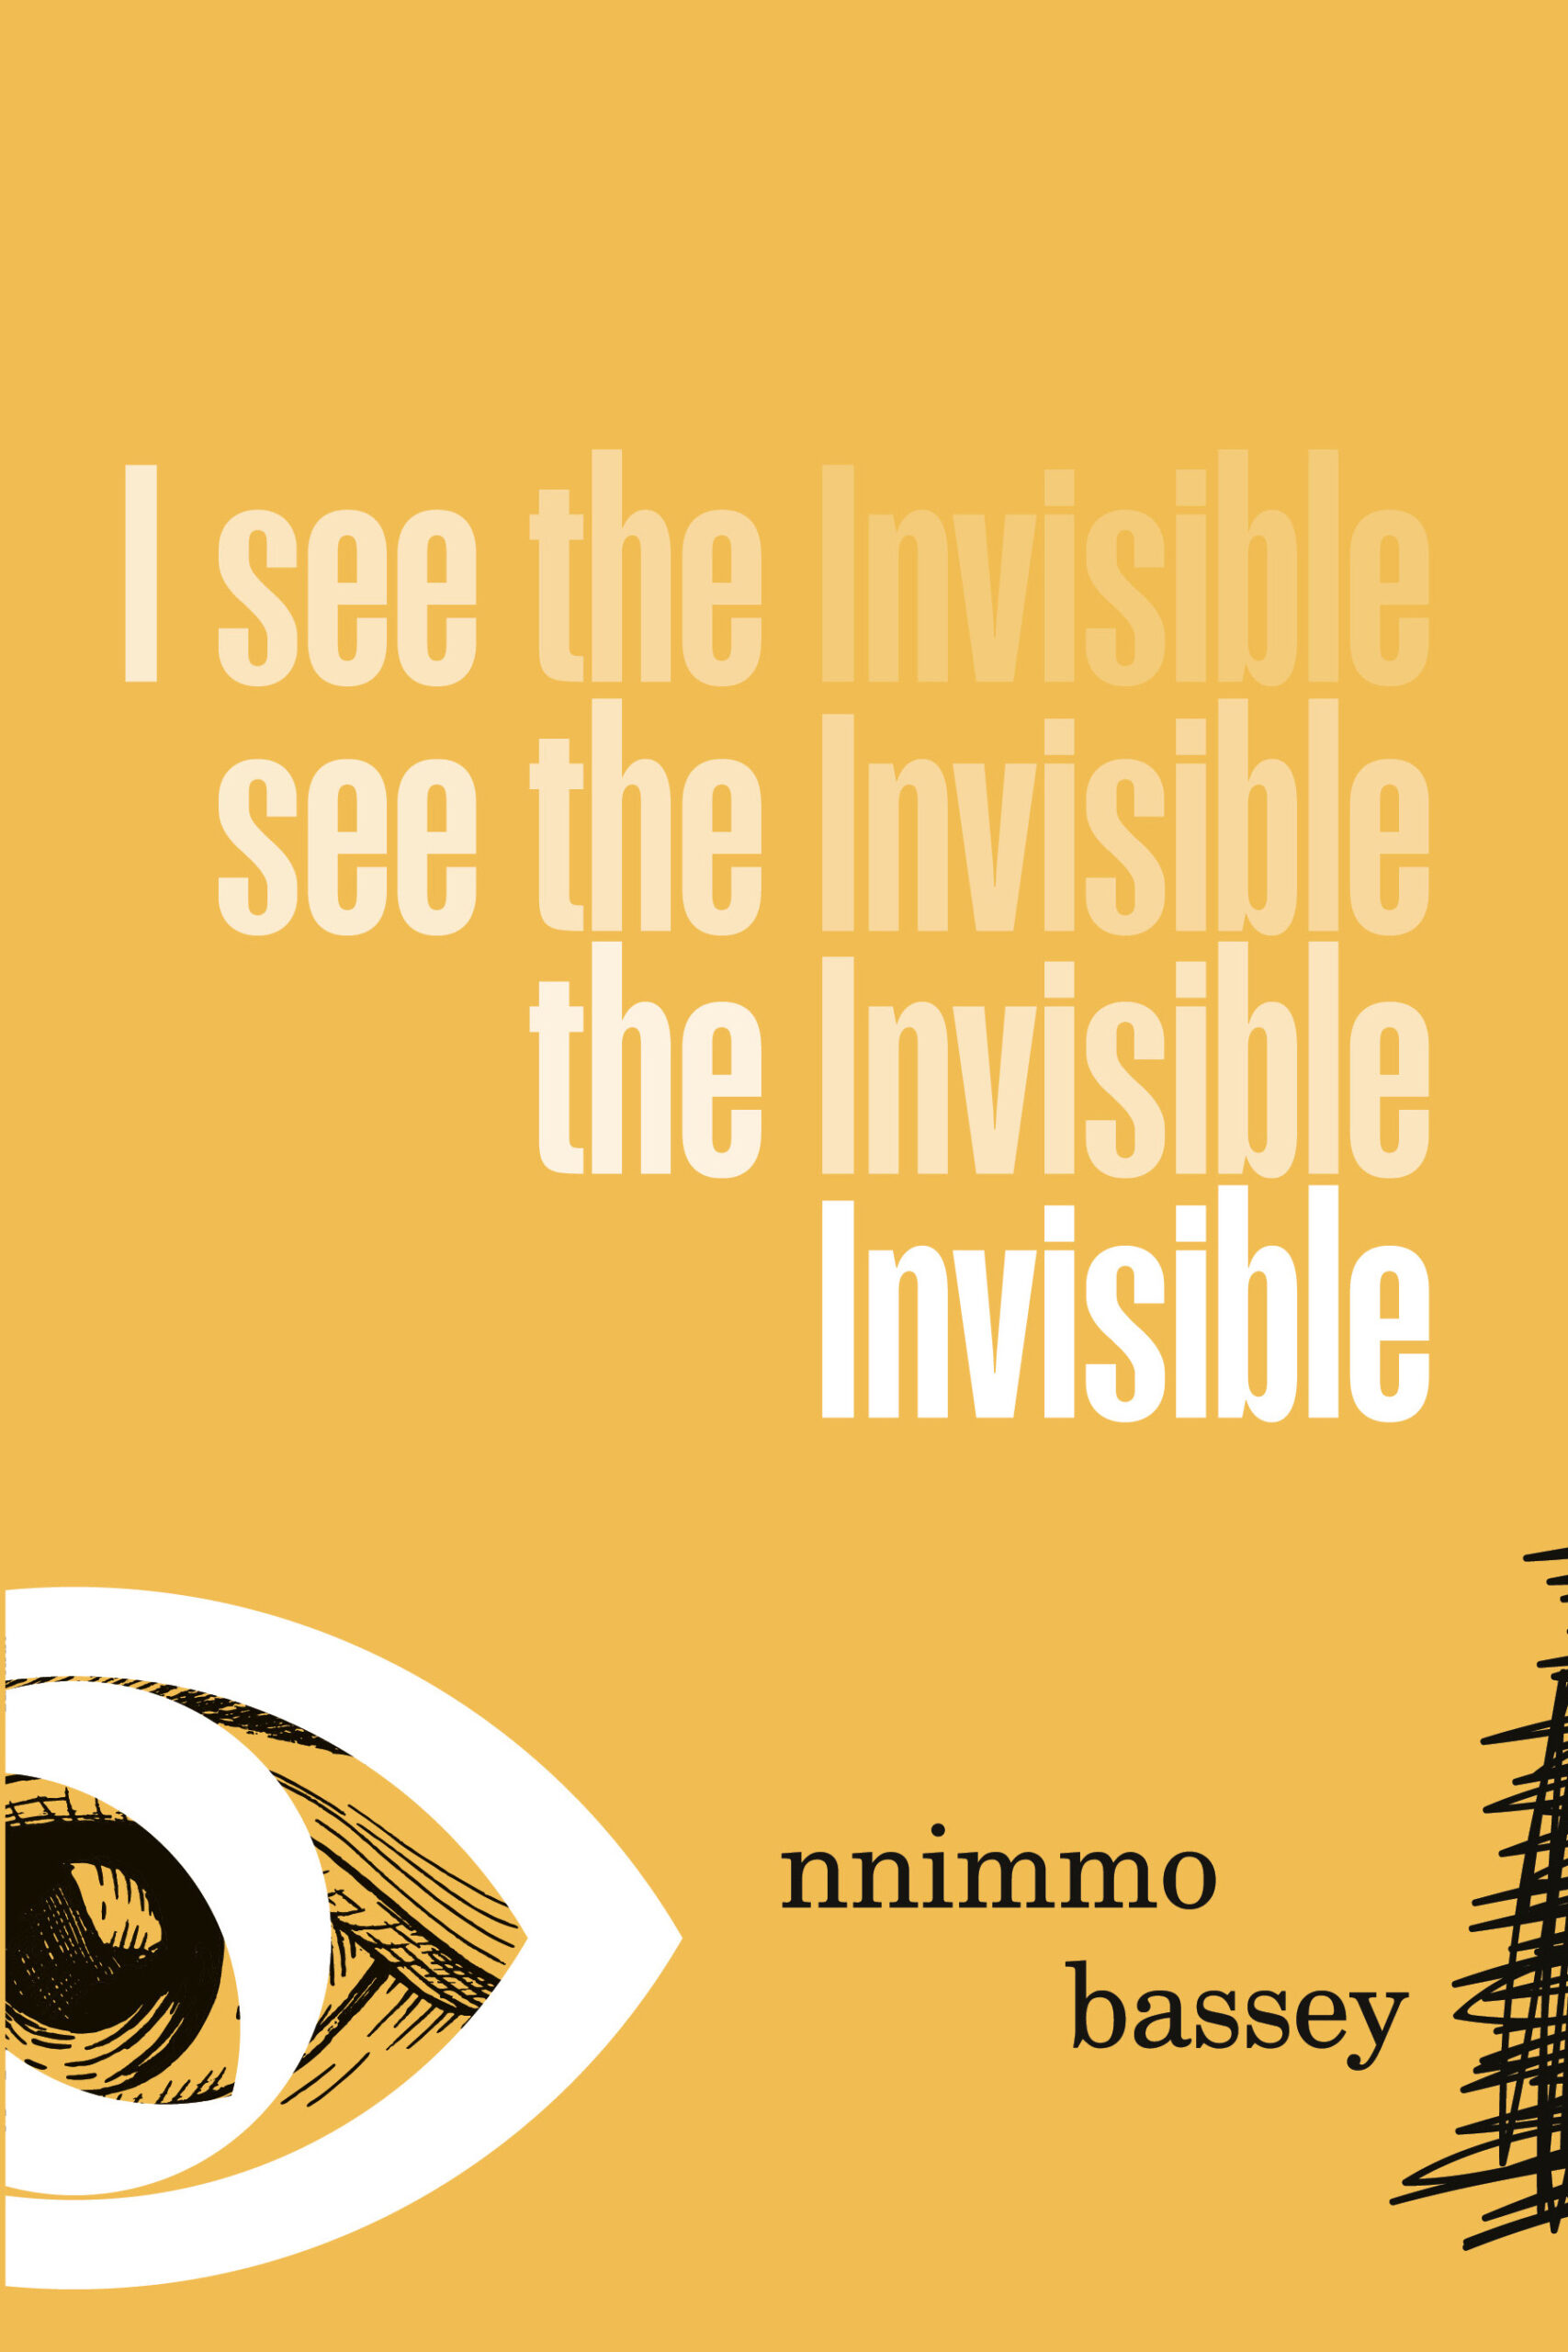 I see the invisible